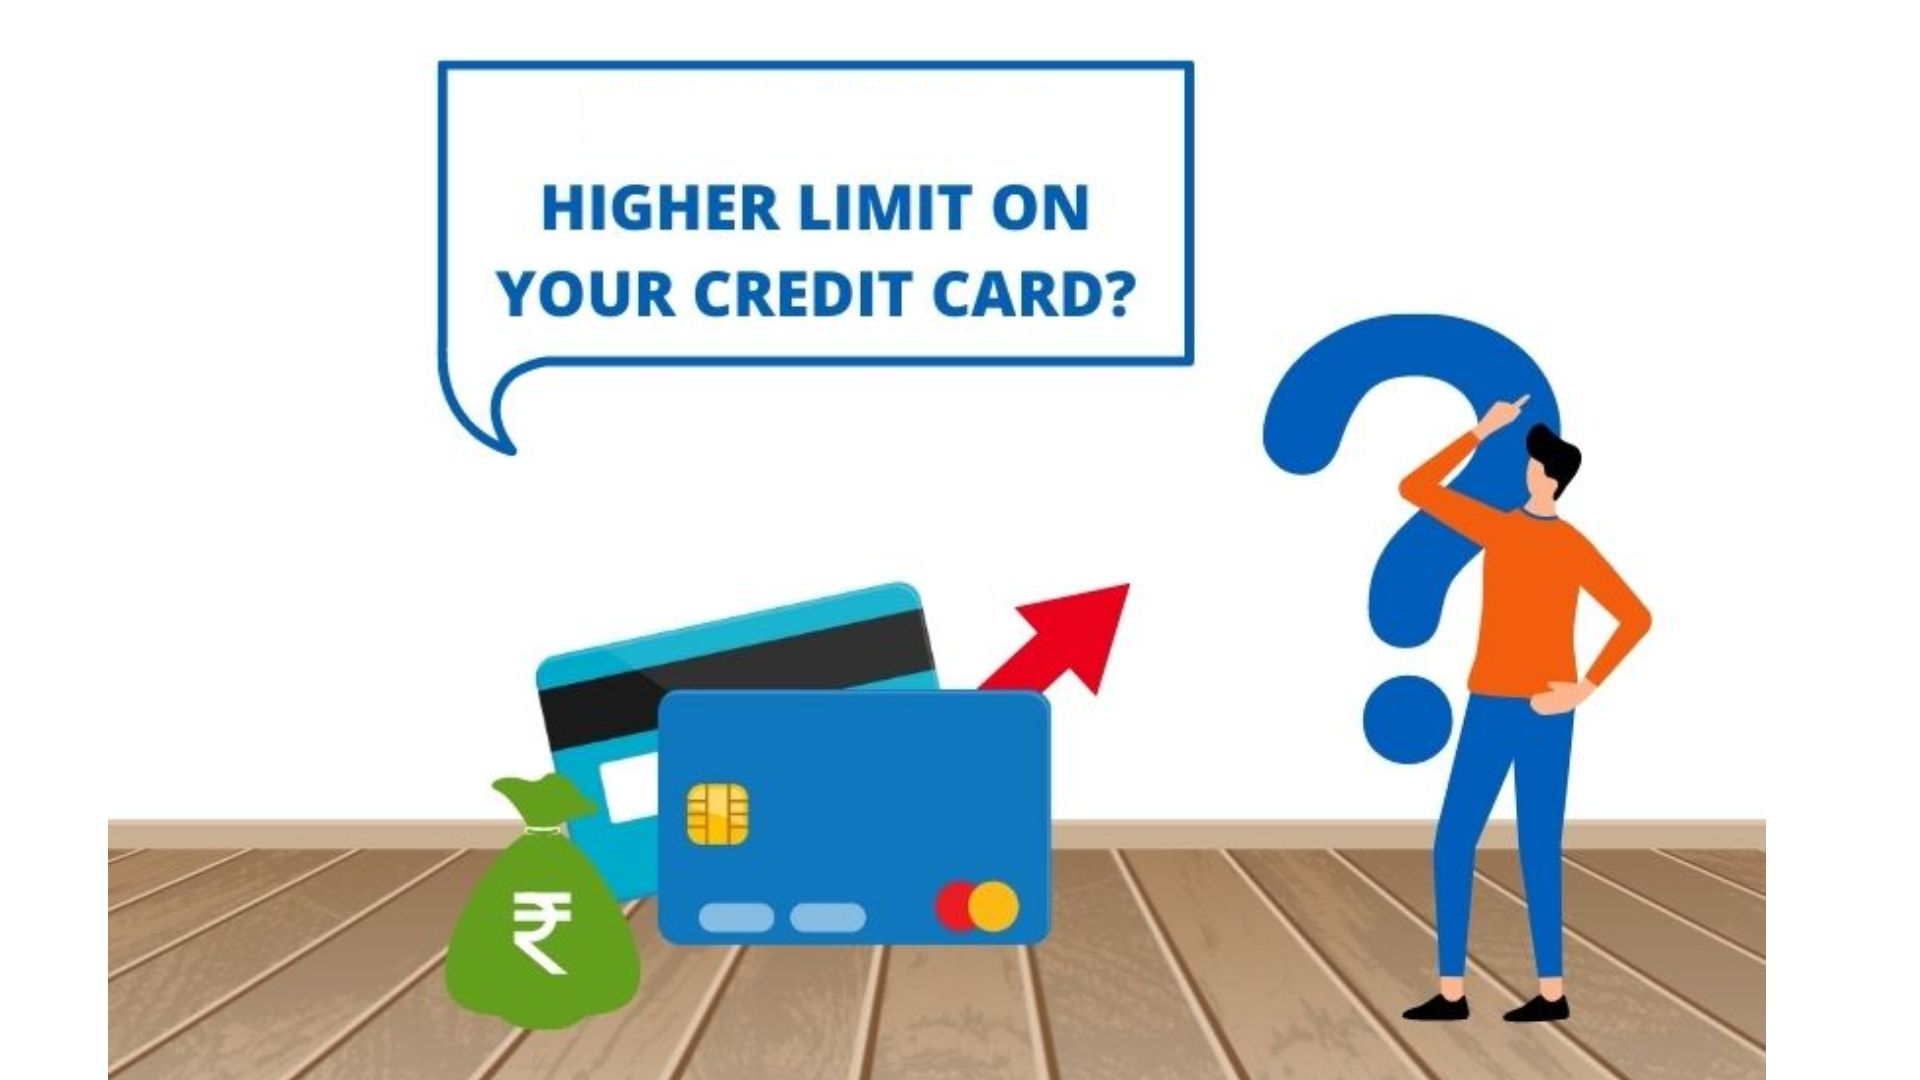 Credit Card with a Higher Limit